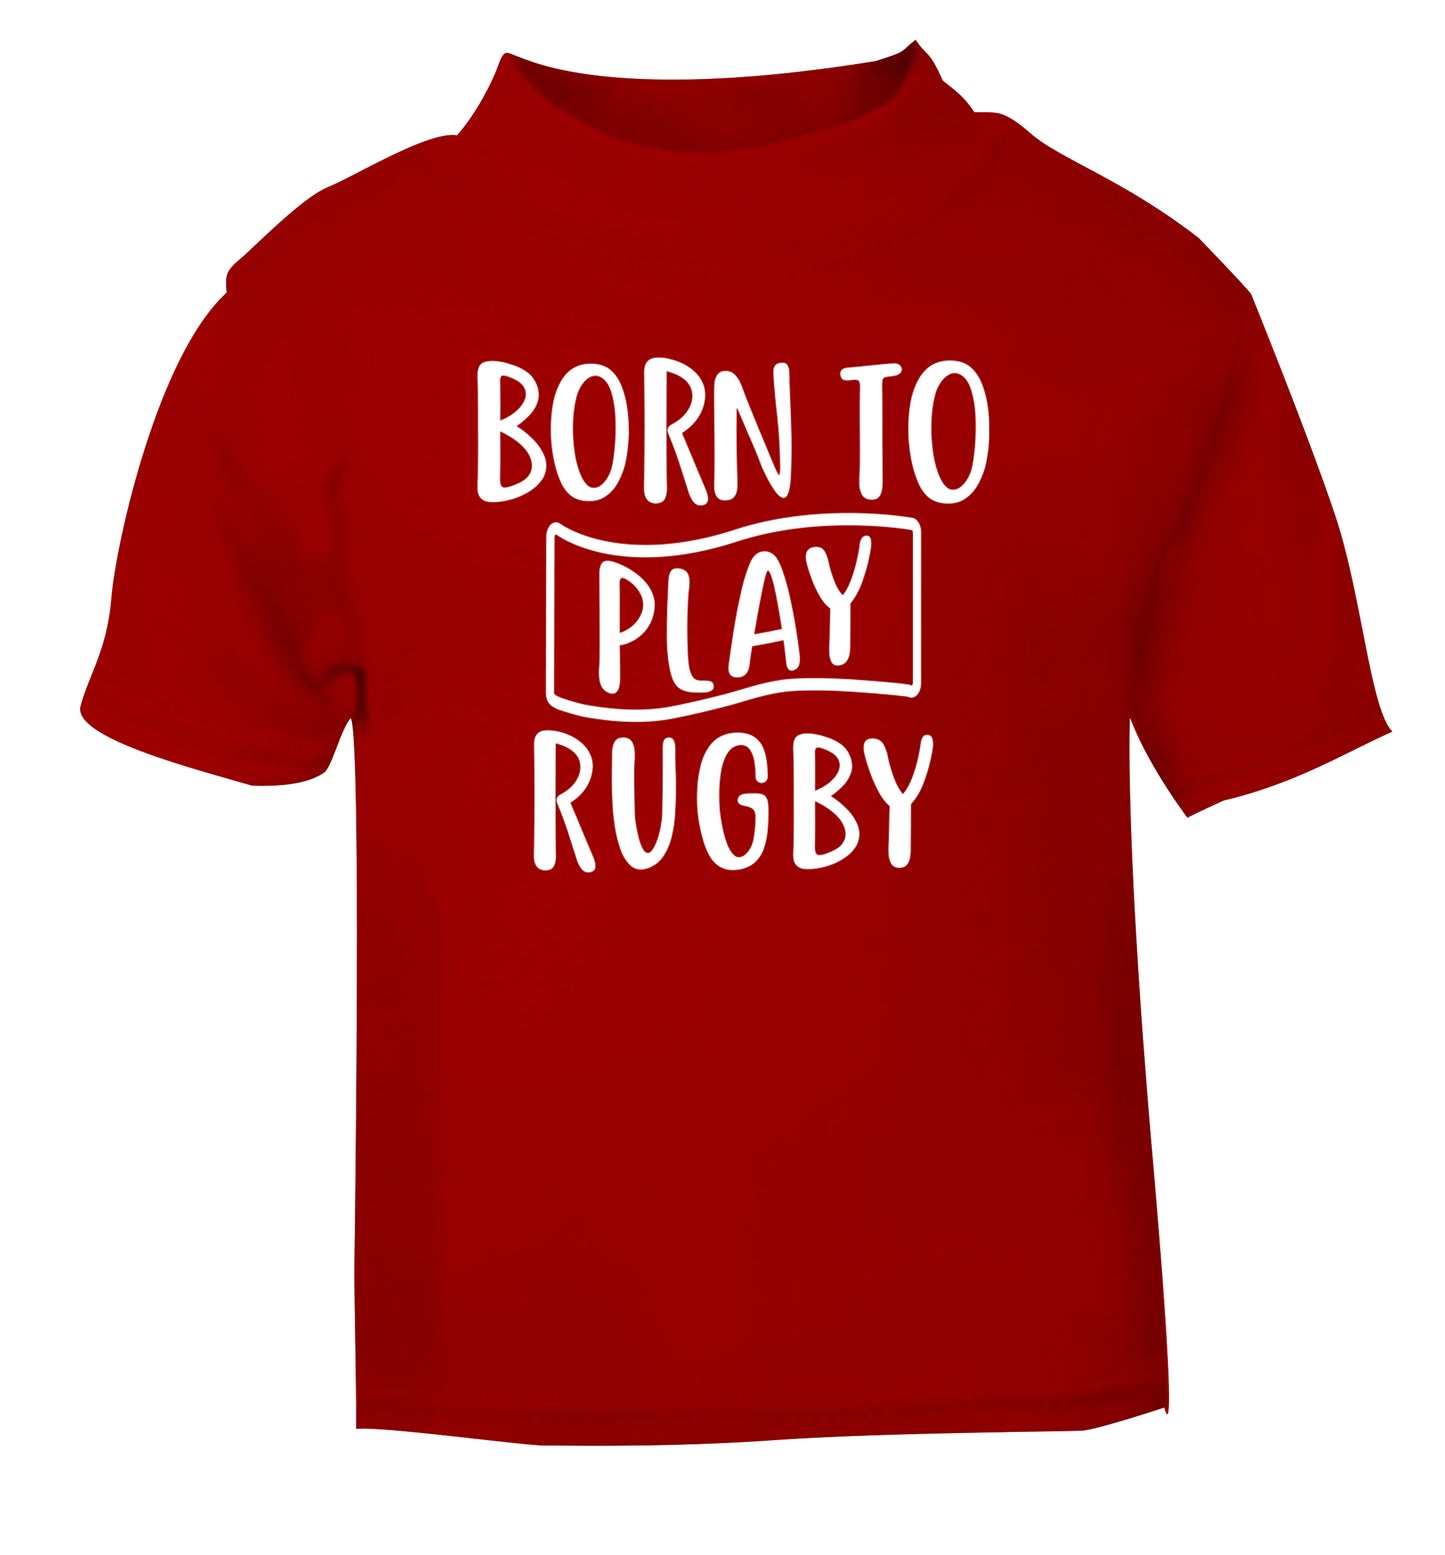 Born to play rugby red Baby Toddler Tshirt 2 Years